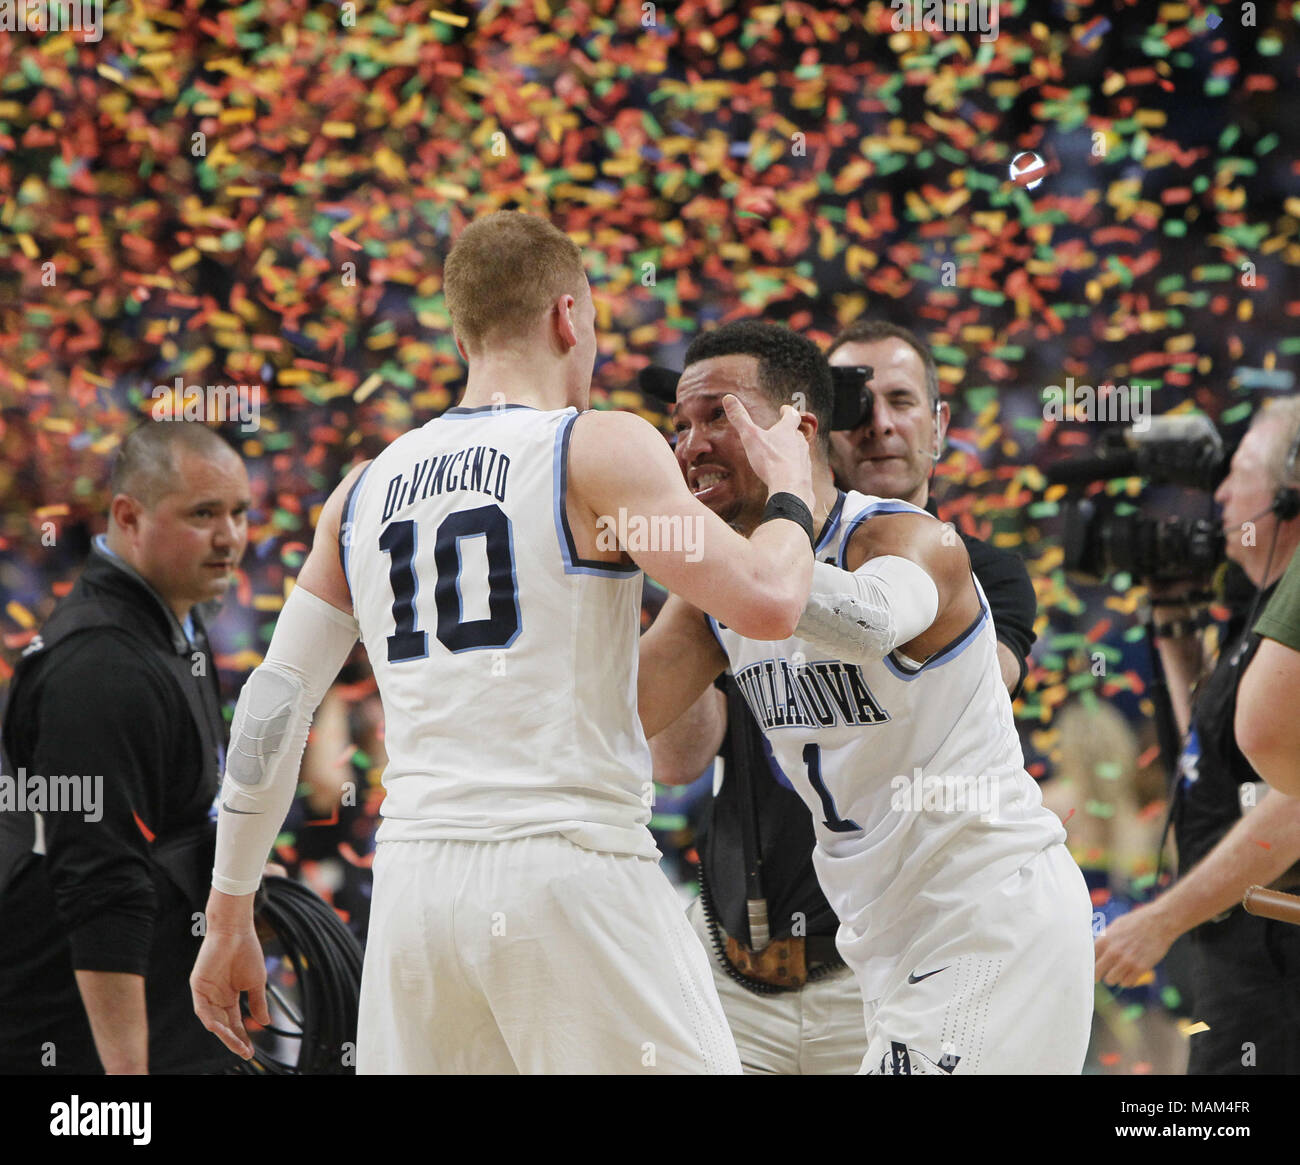 San Antonio, USA. 2nd Apr, 2018. Jalen Brunson (R) of Villanova celebrates with his teammate Donte DiVincenzo after beating Michigan with 79-62 in the championship game of the Final Four NCAA college basketball tournament, in San Antonio, Texas, the United States, on April 2, 2018. Credit: Song Qiong/Xinhua/Alamy Live News Stock Photo